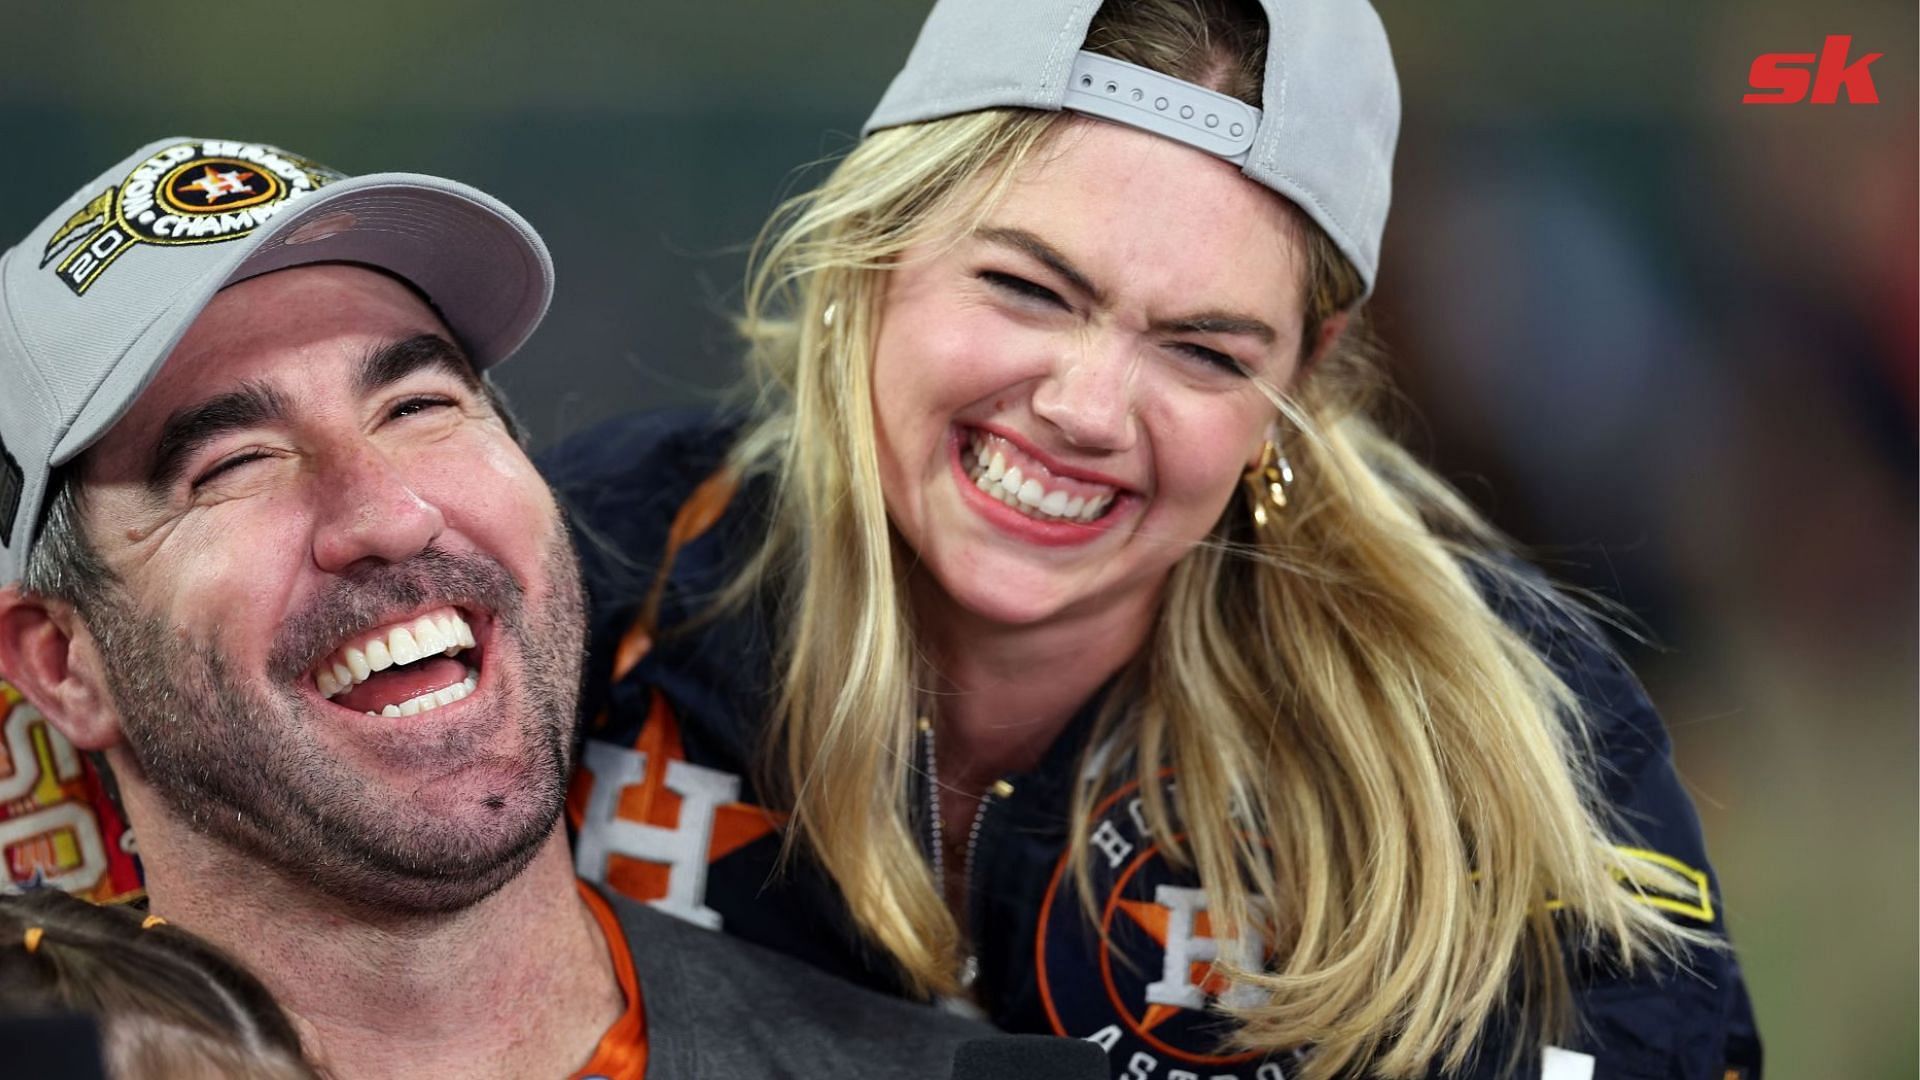 Justin Verlander, Kate Upton On Vacation: Pair Spotted In